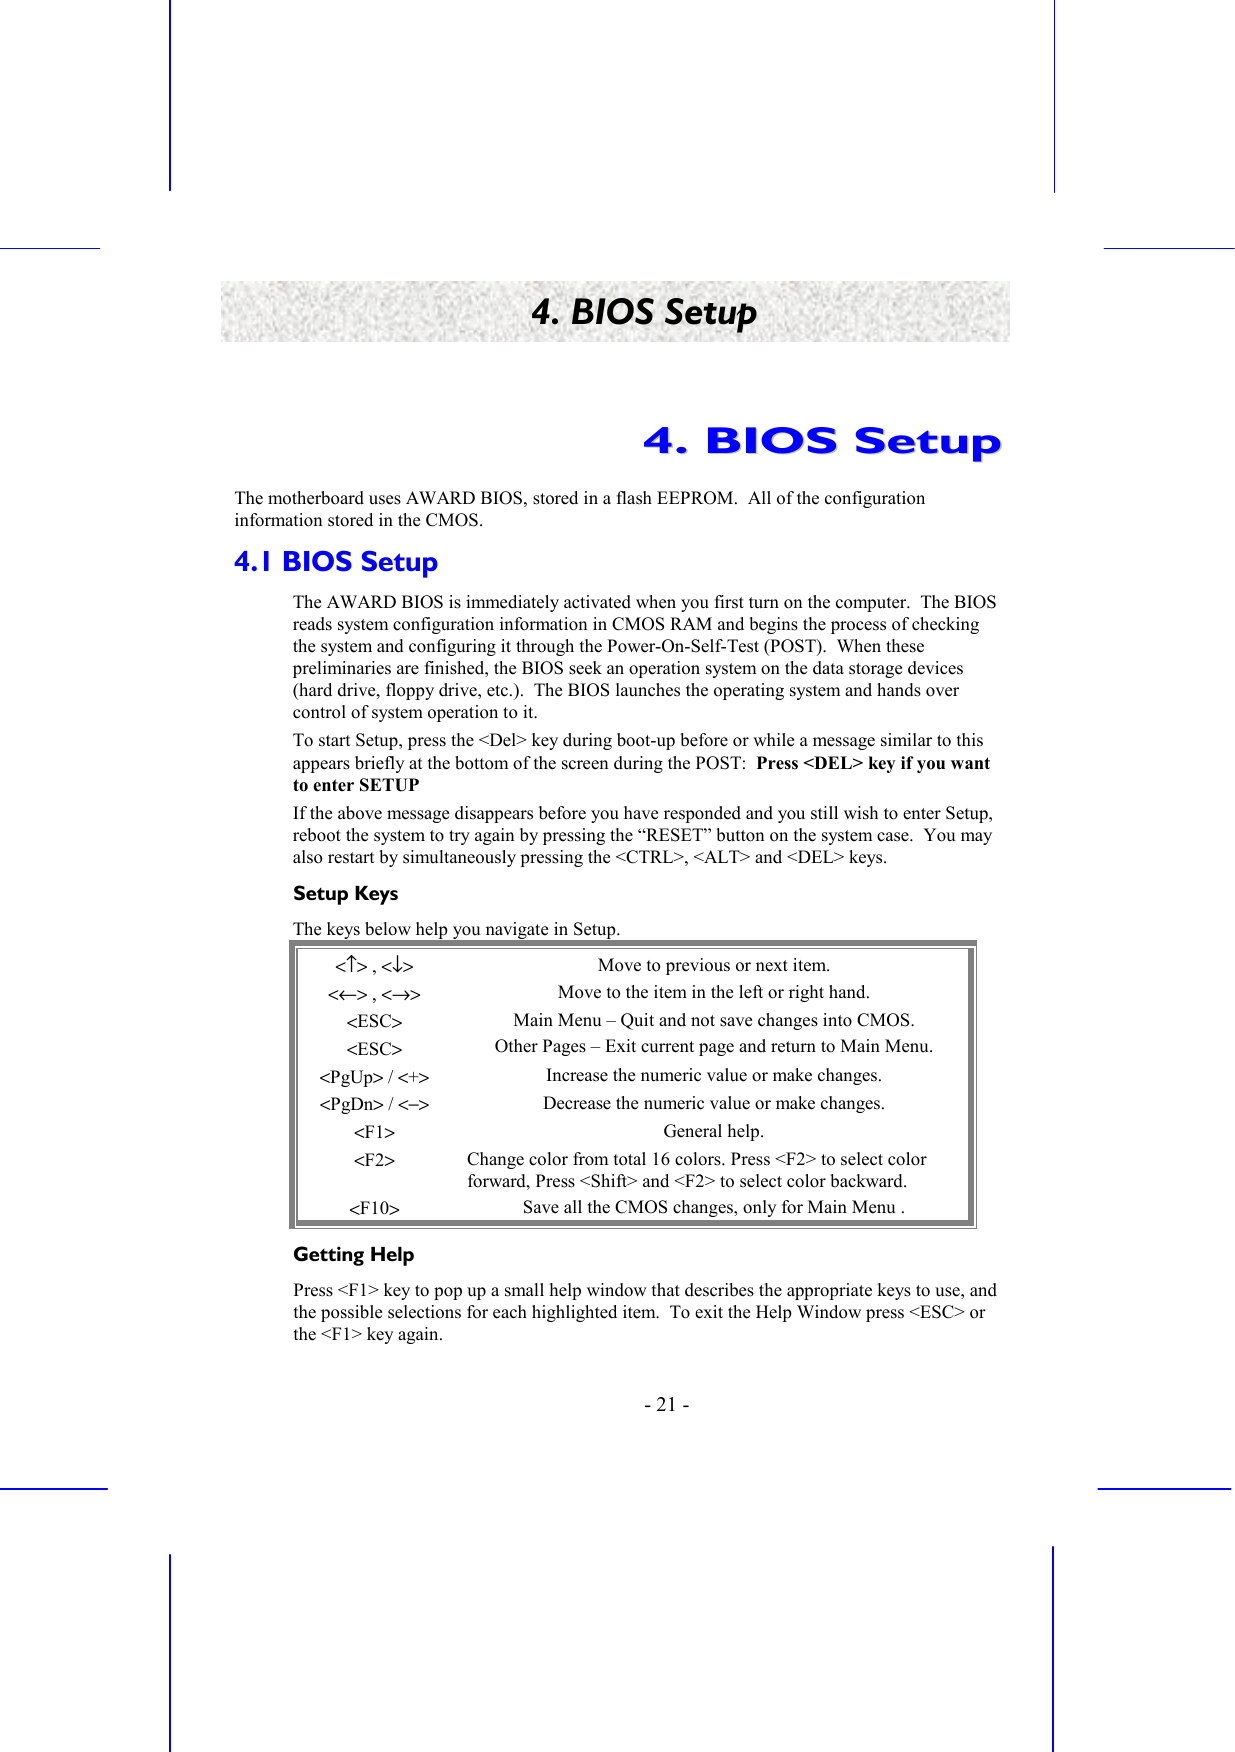    - 21 - 4. BIOS Setup 44..  BBIIOOSS  SSeettuupp  The motherboard uses AWARD BIOS, stored in a flash EEPROM.  All of the configuration information stored in the CMOS. 4.1 BIOS Setup The AWARD BIOS is immediately activated when you first turn on the computer.  The BIOS reads system configuration information in CMOS RAM and begins the process of checking the system and configuring it through the Power-On-Self-Test (POST).  When these preliminaries are finished, the BIOS seek an operation system on the data storage devices (hard drive, floppy drive, etc.).  The BIOS launches the operating system and hands over control of system operation to it. To start Setup, press the &lt;Del&gt; key during boot-up before or while a message similar to this appears briefly at the bottom of the screen during the POST:  Press &lt;DEL&gt; key if you want to enter SETUP If the above message disappears before you have responded and you still wish to enter Setup, reboot the system to try again by pressing the “RESET” button on the system case.  You may also restart by simultaneously pressing the &lt;CTRL&gt;, &lt;ALT&gt; and &lt;DEL&gt; keys. Setup Keys The keys below help you navigate in Setup. &lt;↑&gt; , &lt;↓&gt; Move to previous or next item. &lt;←&gt; , &lt;→&gt; Move to the item in the left or right hand. &lt;ESC&gt; &lt;ESC&gt; Main Menu – Quit and not save changes into CMOS. Other Pages – Exit current page and return to Main Menu. &lt;PgUp&gt; / &lt;+&gt; Increase the numeric value or make changes. &lt;PgDn&gt; / &lt;−&gt; Decrease the numeric value or make changes. &lt;F1&gt;   General help. &lt;F2&gt; Change color from total 16 colors. Press &lt;F2&gt; to select color forward, Press &lt;Shift&gt; and &lt;F2&gt; to select color backward. &lt;F10&gt; Save all the CMOS changes, only for Main Menu . Getting Help Press &lt;F1&gt; key to pop up a small help window that describes the appropriate keys to use, and the possible selections for each highlighted item.  To exit the Help Window press &lt;ESC&gt; or the &lt;F1&gt; key again. 